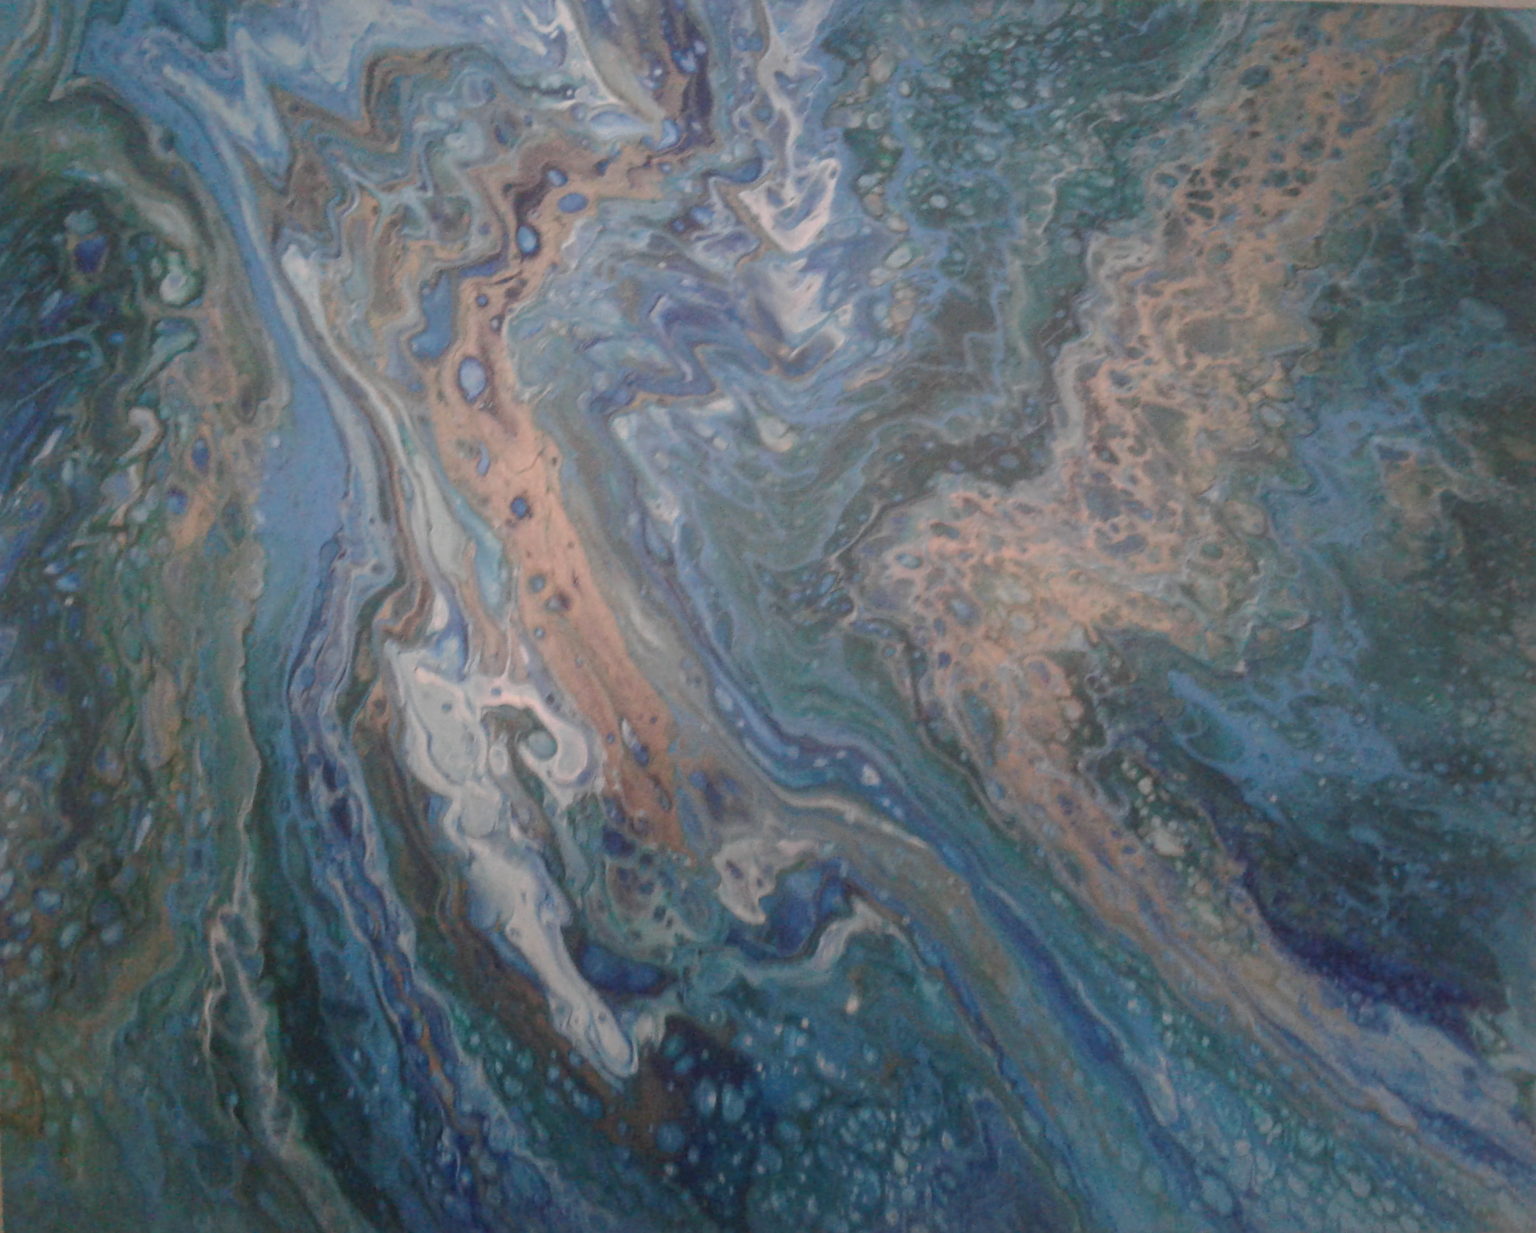 Acrylic pour painting.